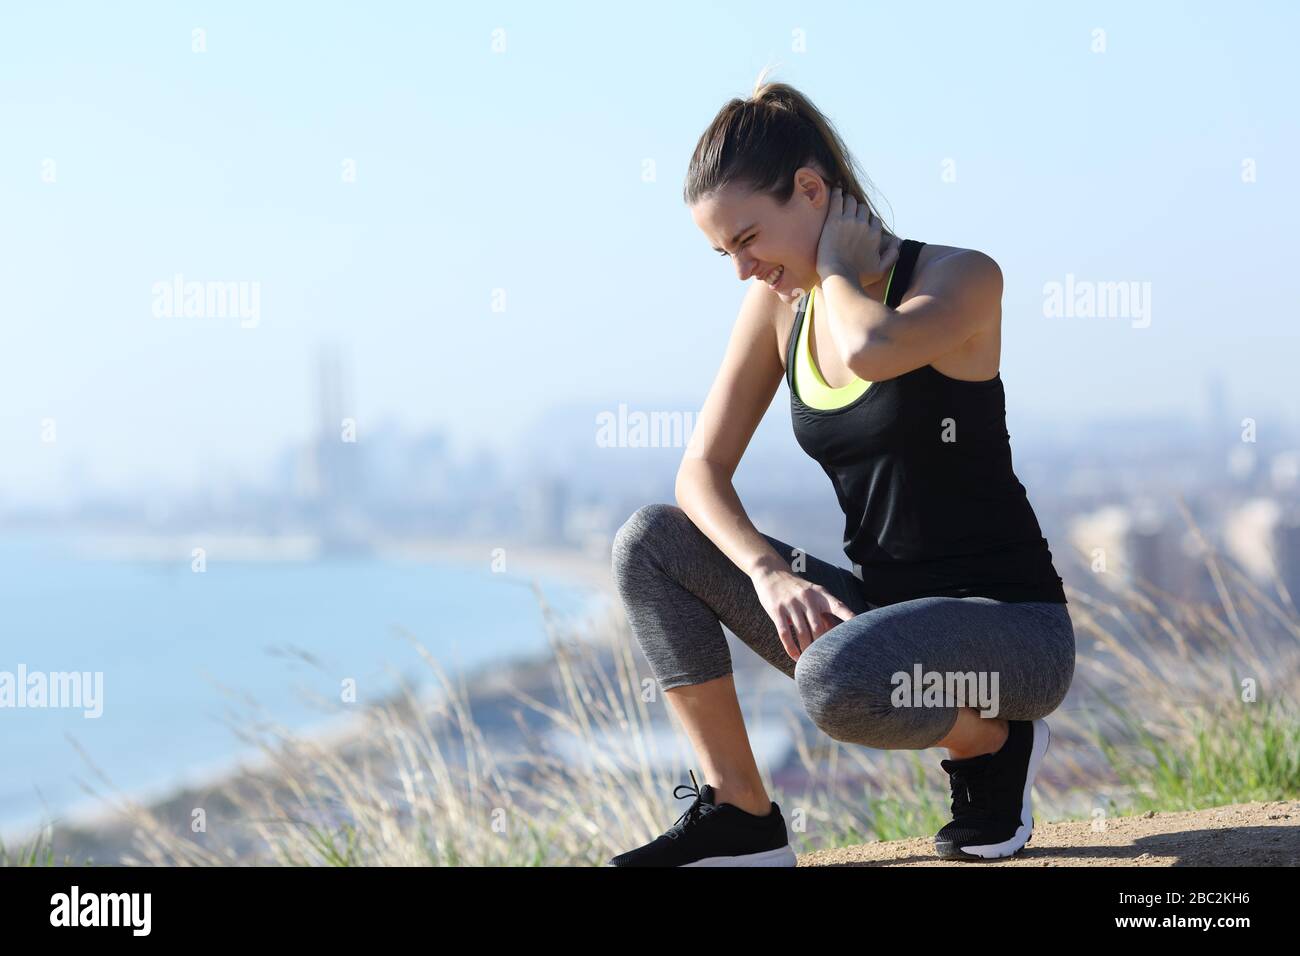 Injured runner woman suffering neck ache after sport in city outskirts Stock Photo